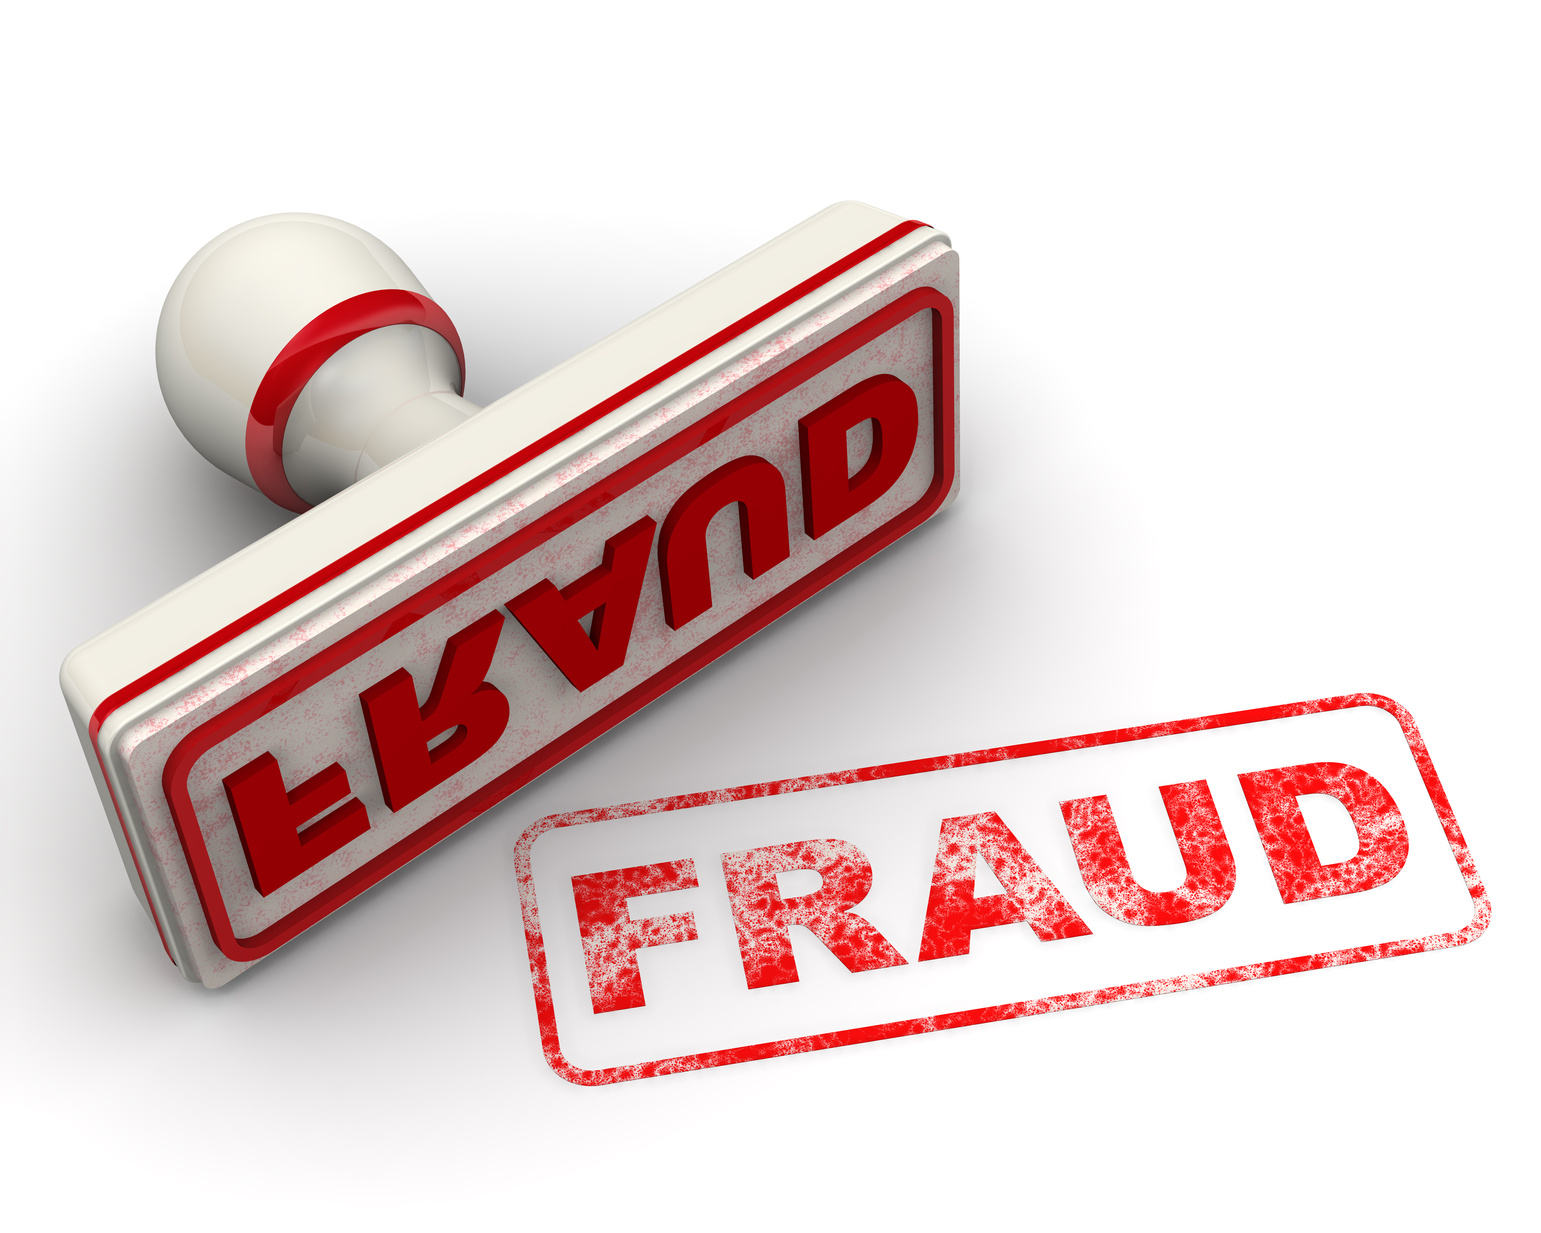 FSB and Alexander Forbes warn against fraudulent activity